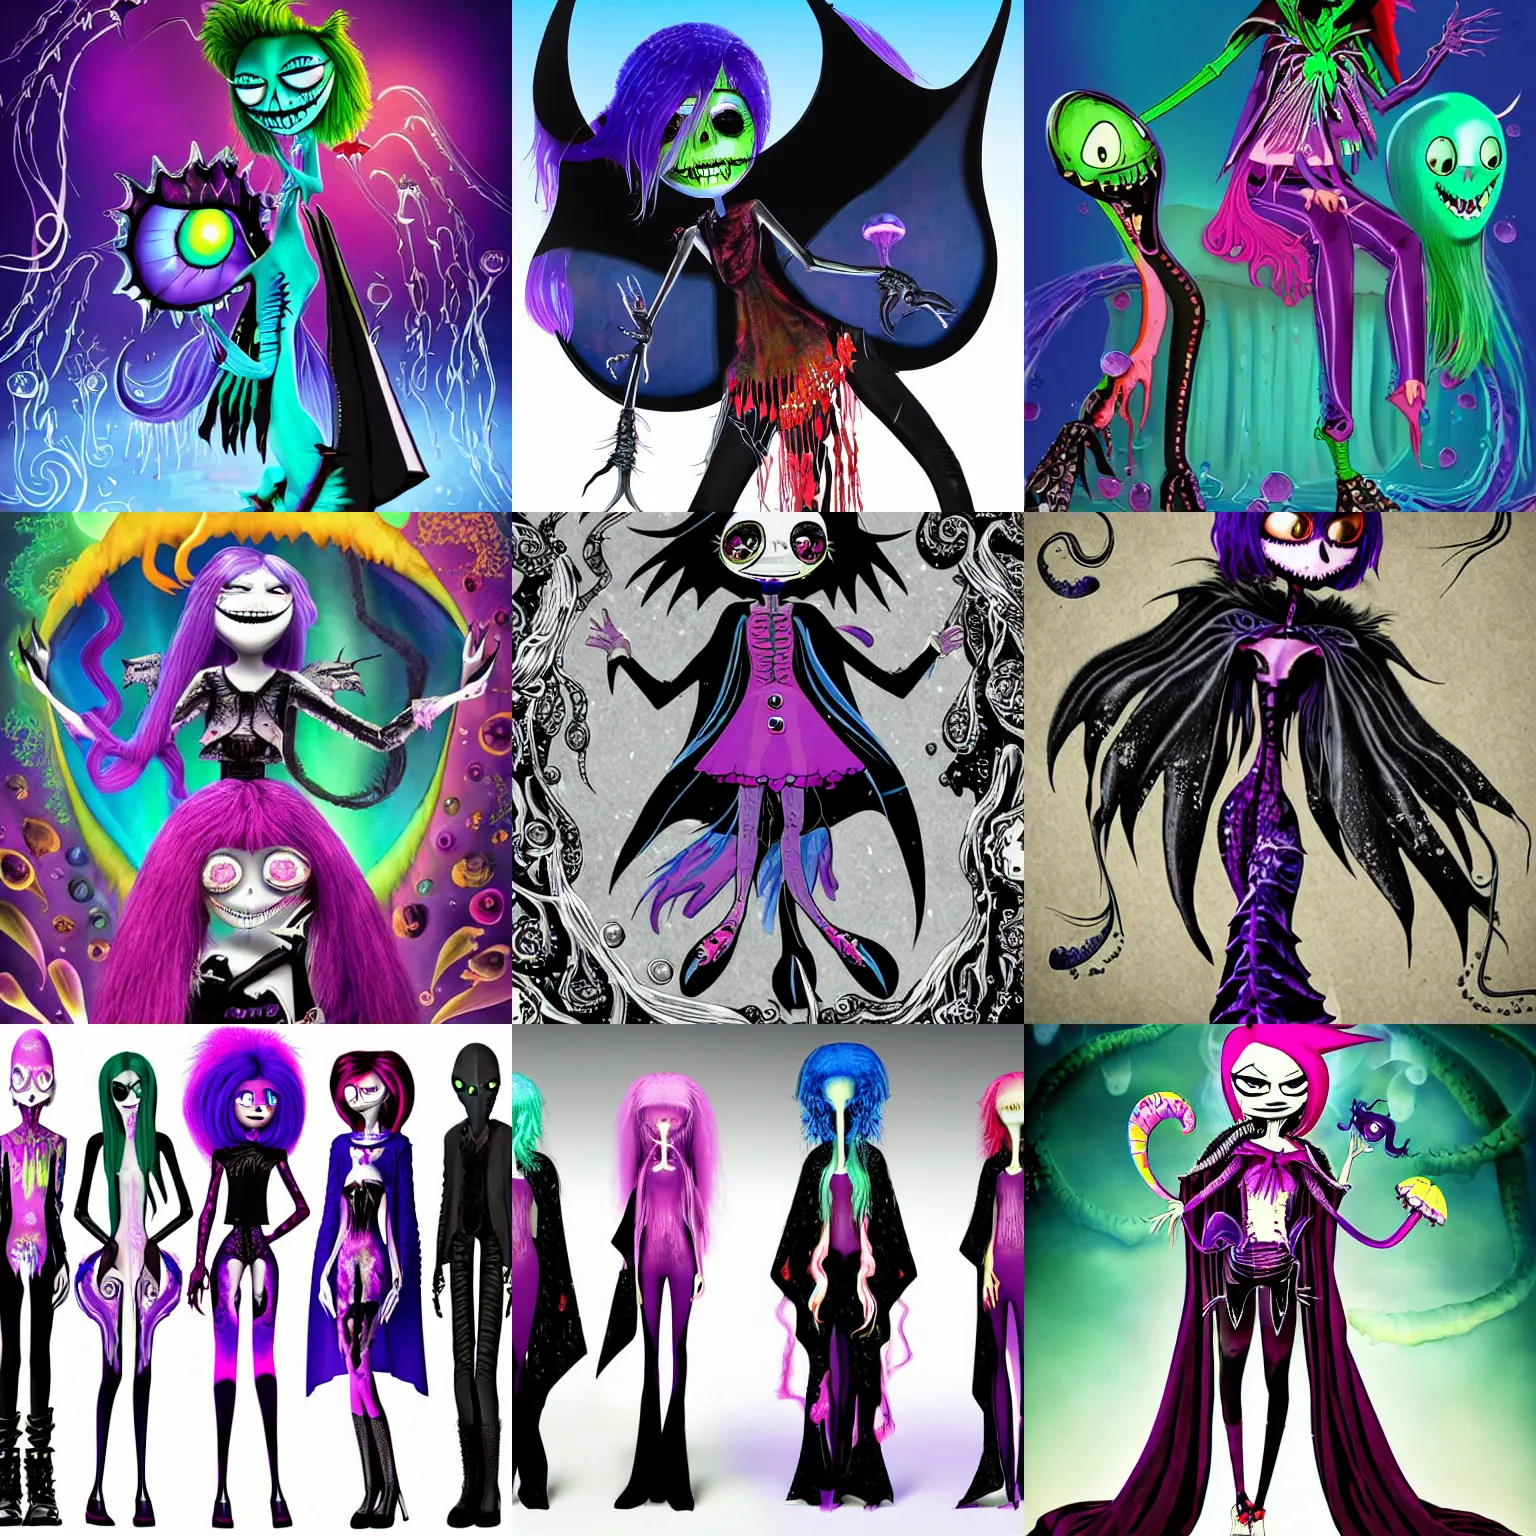 Prompt: lisa frank gothic emo punk vampiric rockstar vampire squid with transparent jellyfish skin character designs of various shapes and sizes by genndy tartakovsky and the team behind tim burtons nightmare before christmas for the new hotel transylvania film starring a vampire squid kraken monster rockstar wearing a bat shaped poncho cape with platform shoes